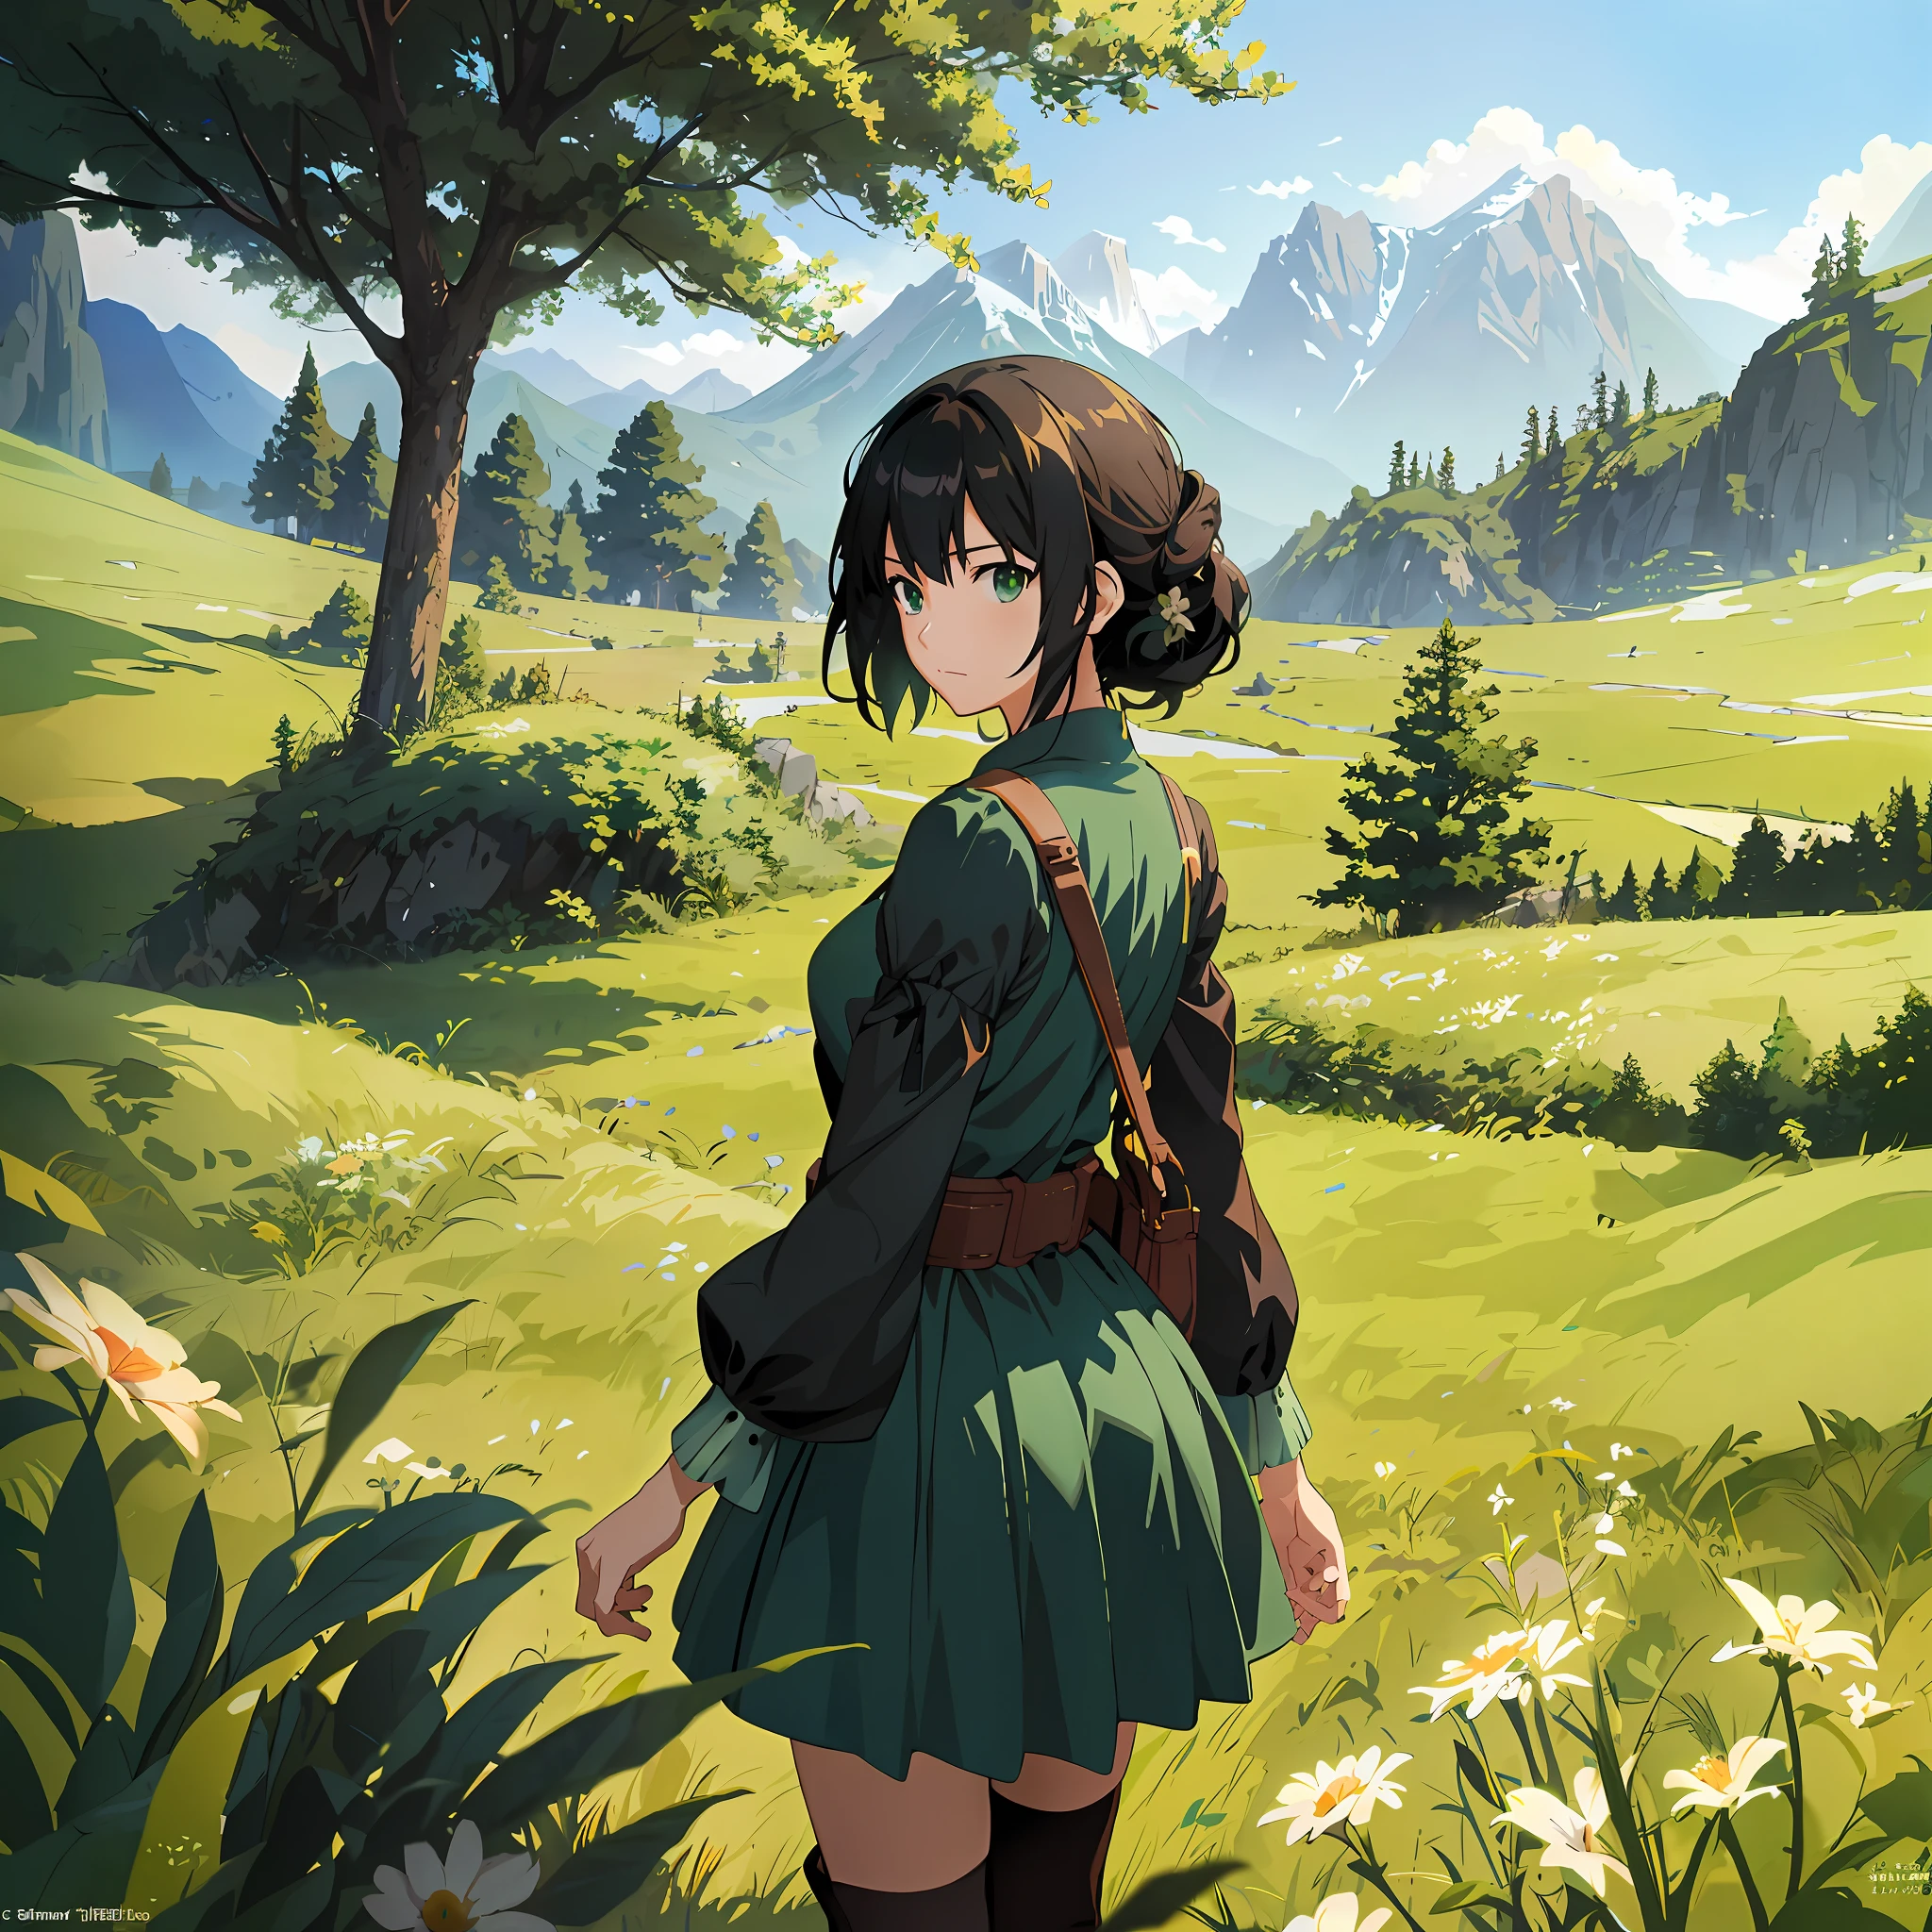 anime girl in green dress standing in a field with mountains in the background, official art, makoto shinkai art style, anime visual of a cute girl, detailed digital anime art, cushart krenz key art feminine, anime visual of a young woman, anime countryside landscape, makoto shinkai style, detailed anime character art, makoto sinkai